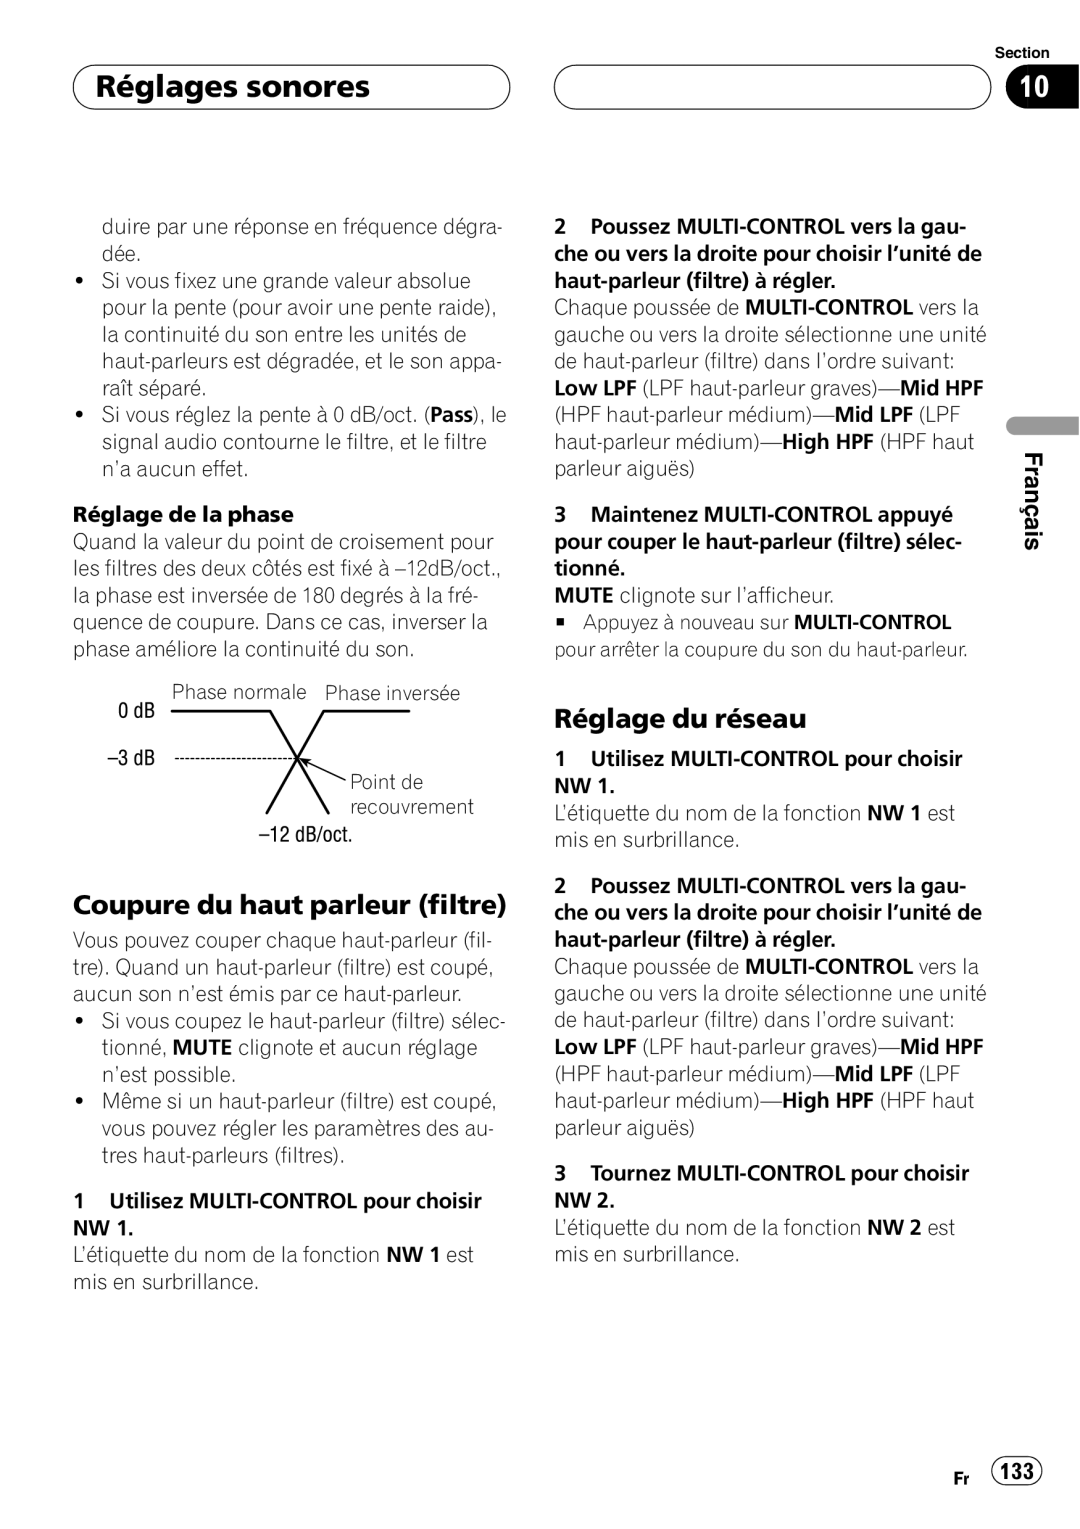 Pioneer DEH-P860MP operation manual Phase normale Phase inversée, Point de, recouvrement 